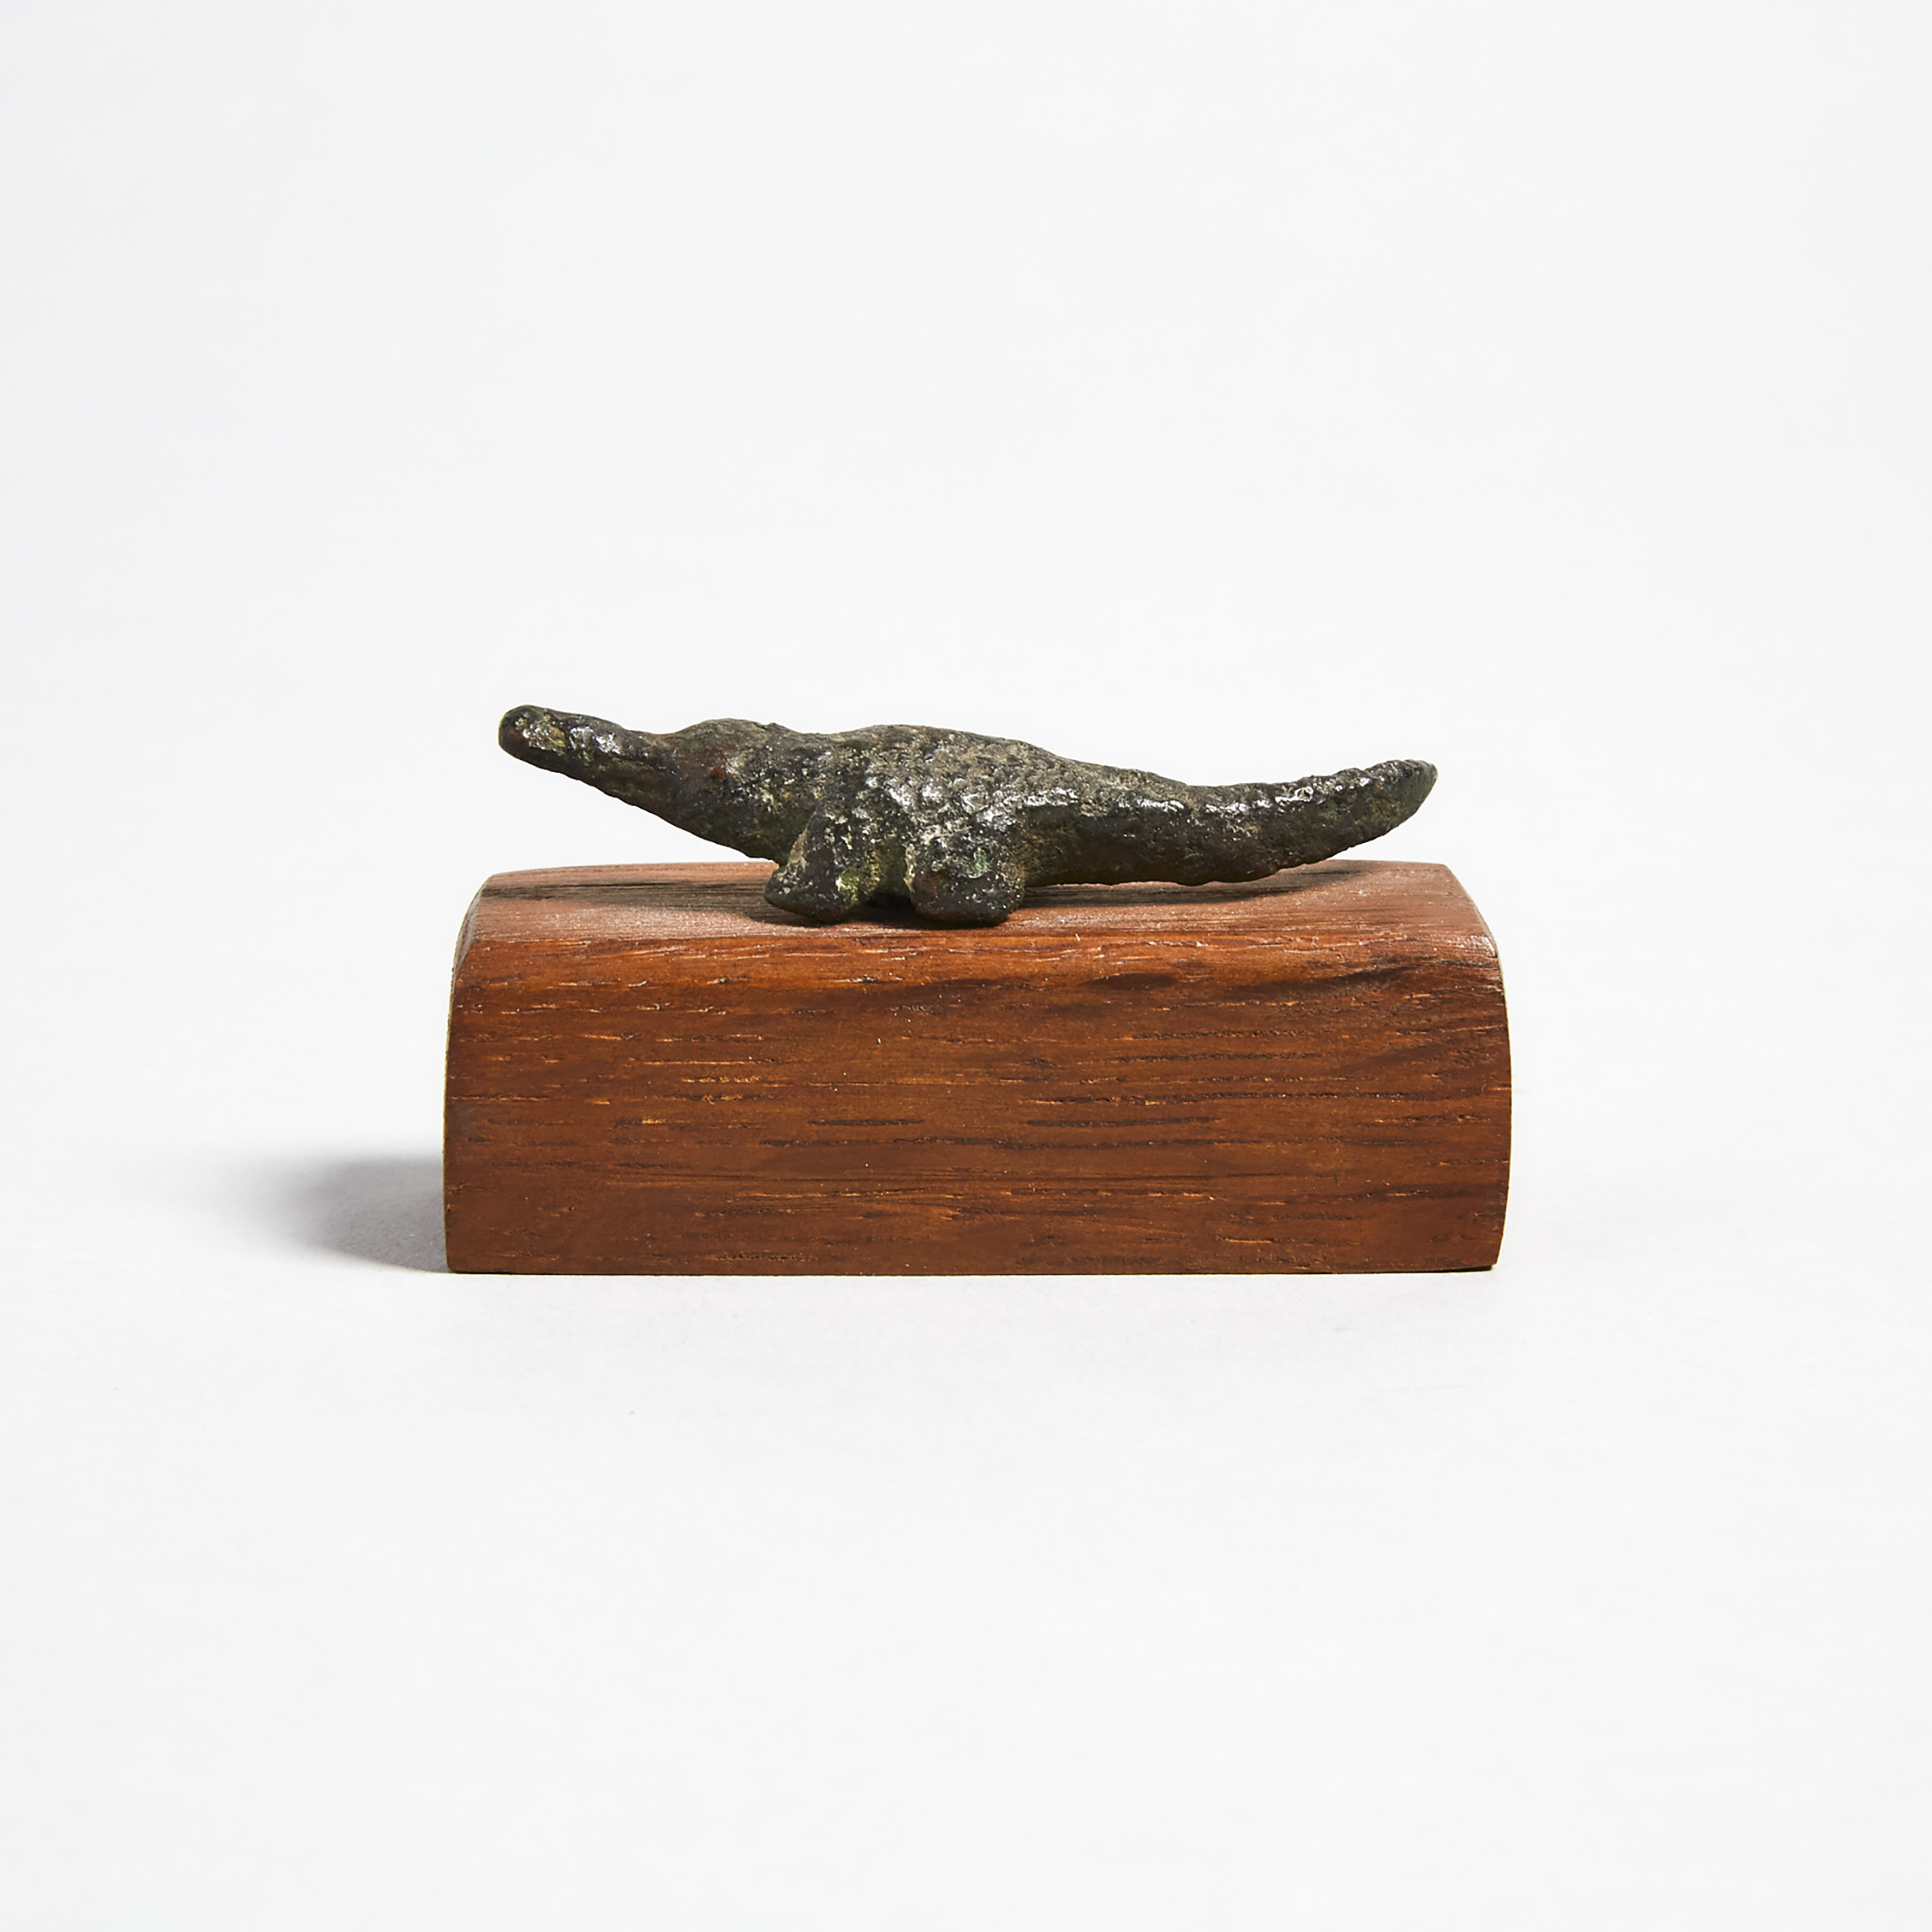 Egyptian Bronze Amulet Mount of Sobek as a Crocodile, Late Period, 664-332 B.C.